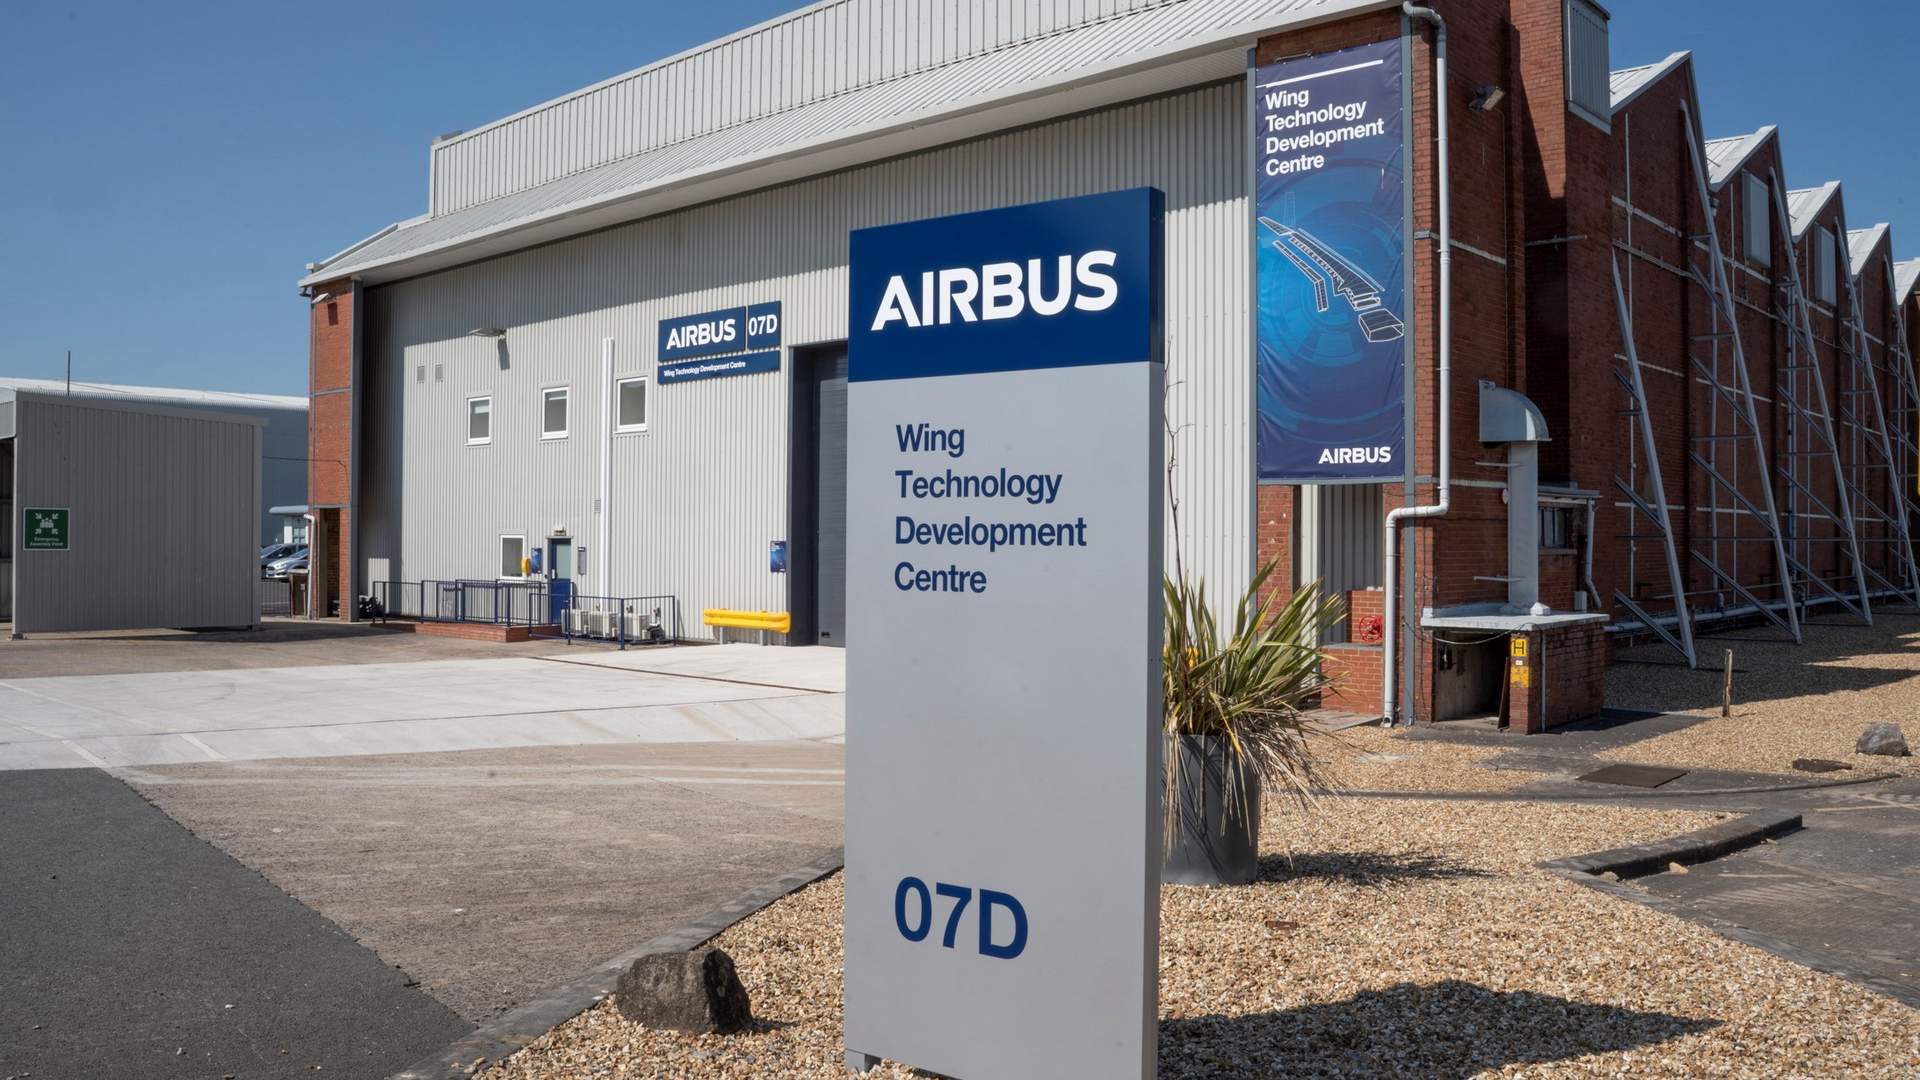 Airbus Launches Technology Hub For New Wing Development